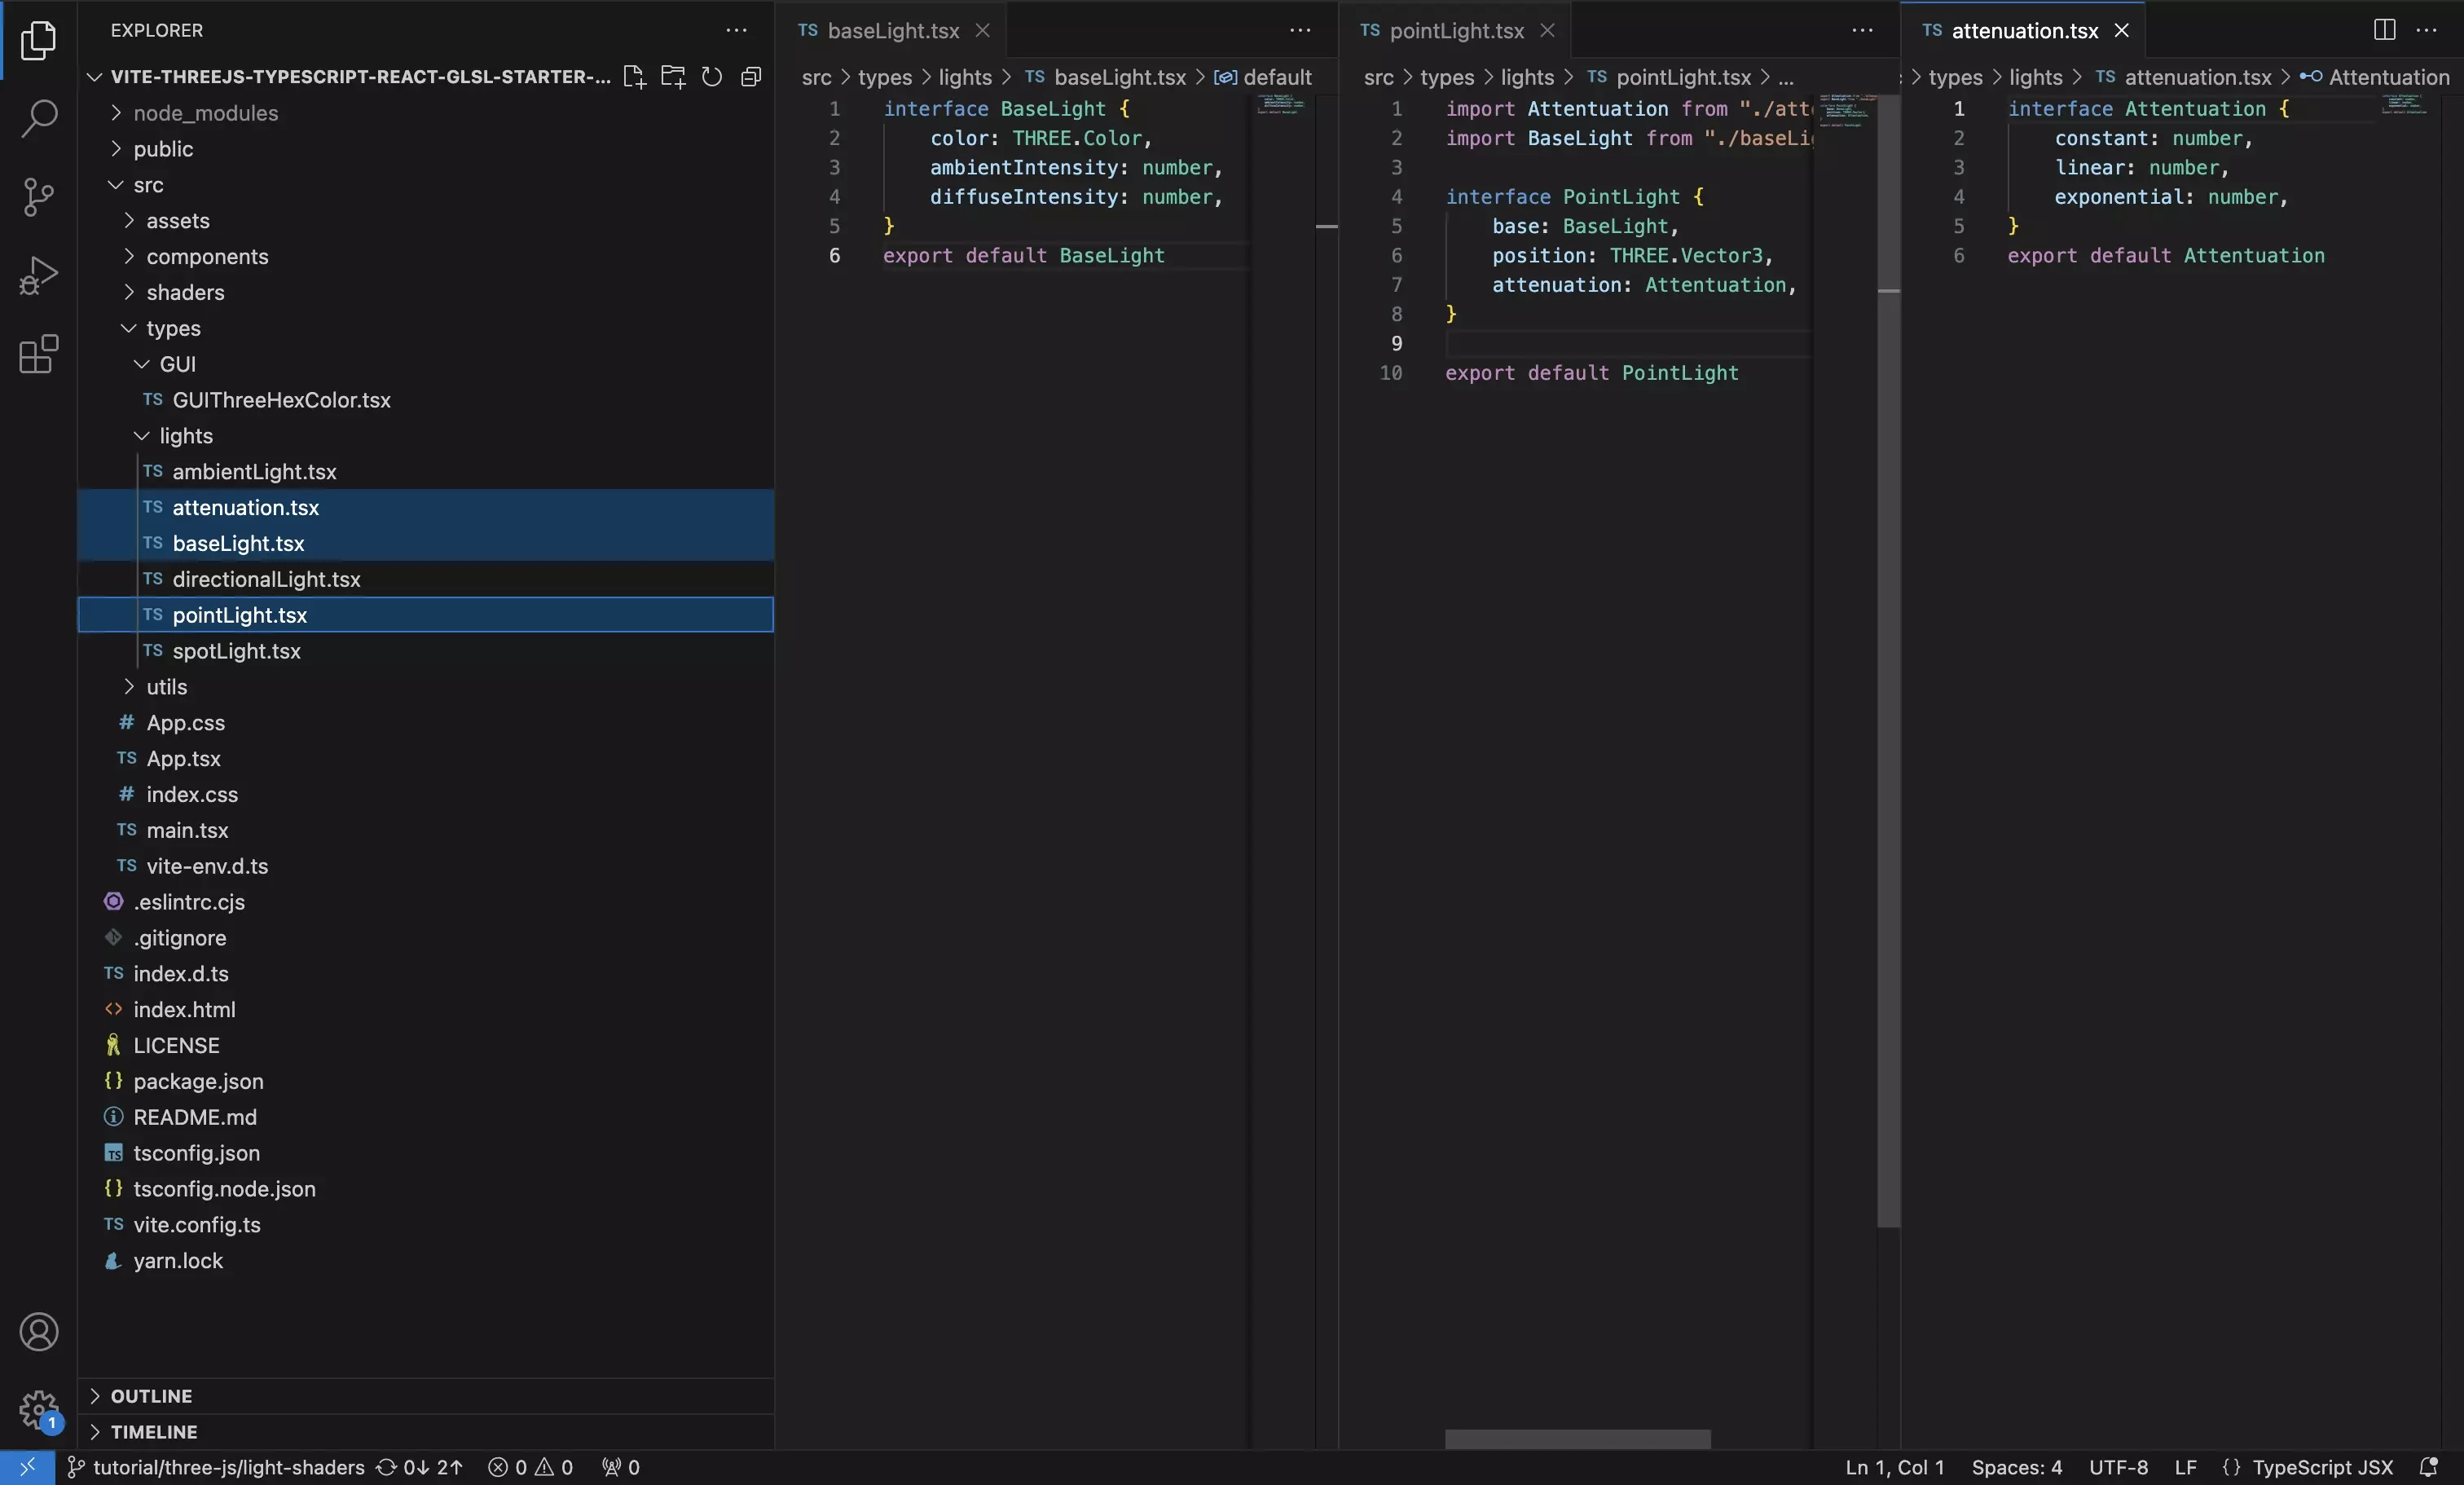 A screenshot of VSCode showing the types for the BaseLight, the Attenuation and PointLight.